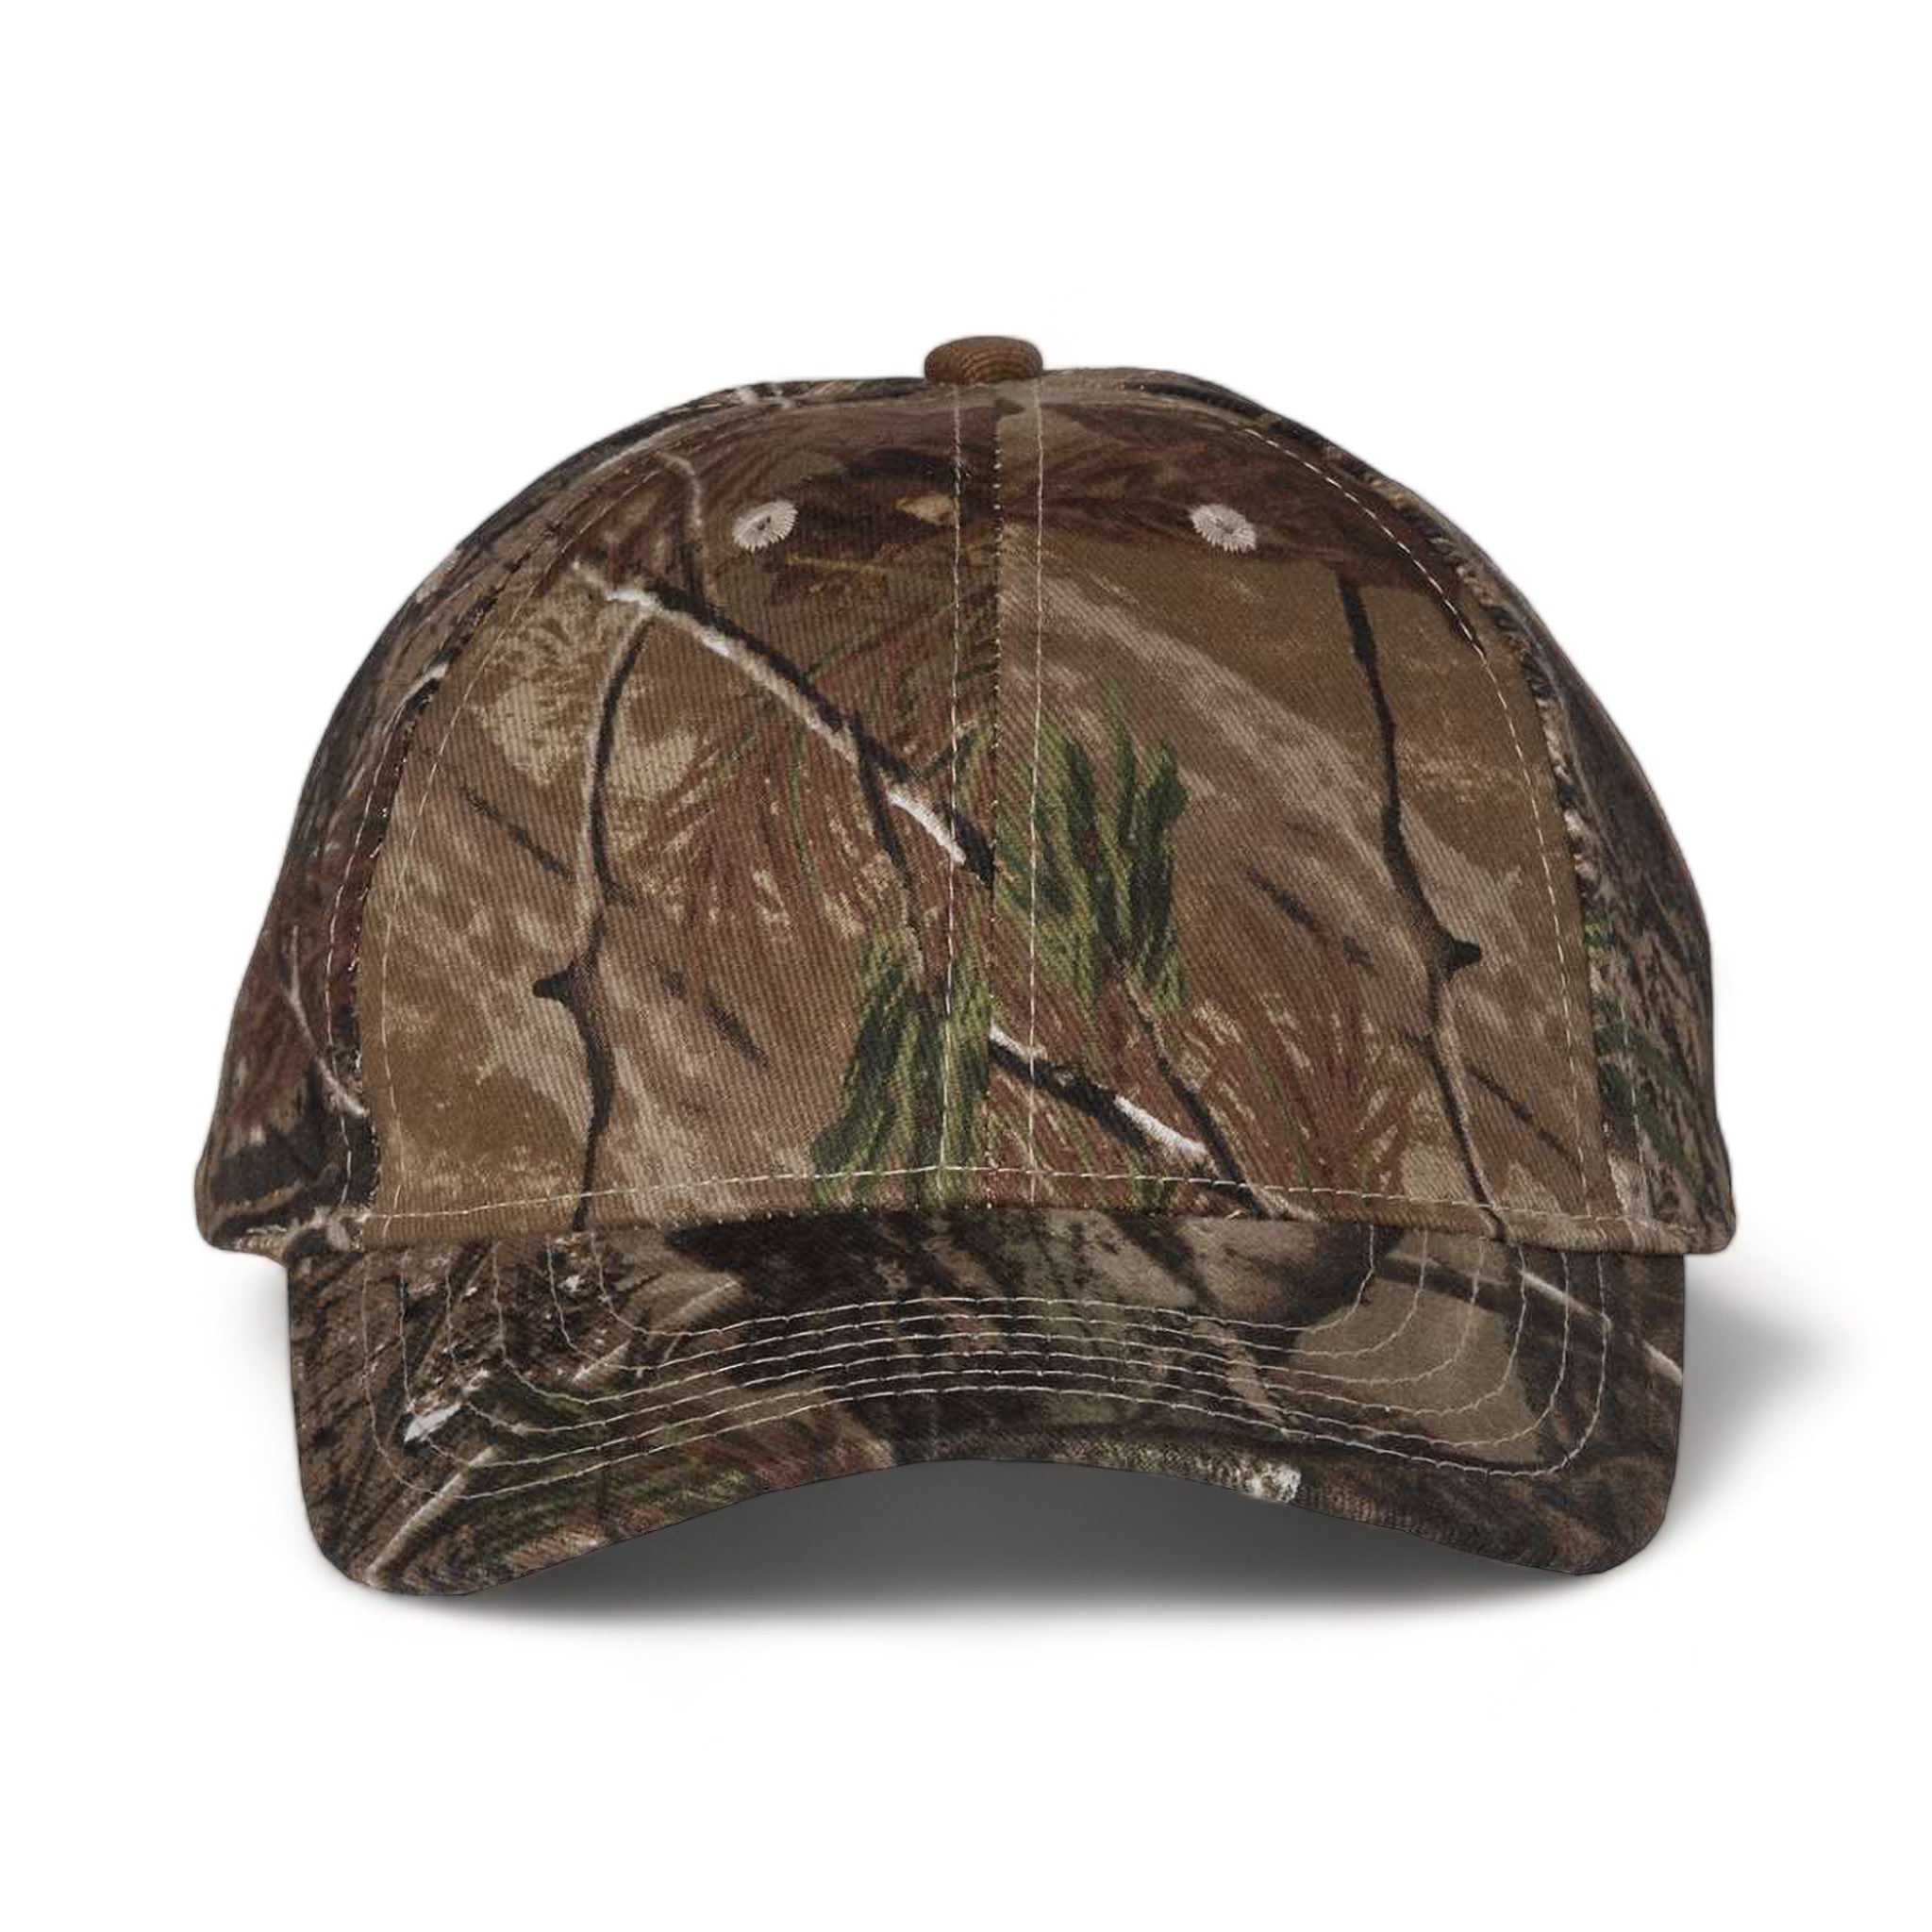 Front view of Kati LC10 custom hat in realtree all purpose